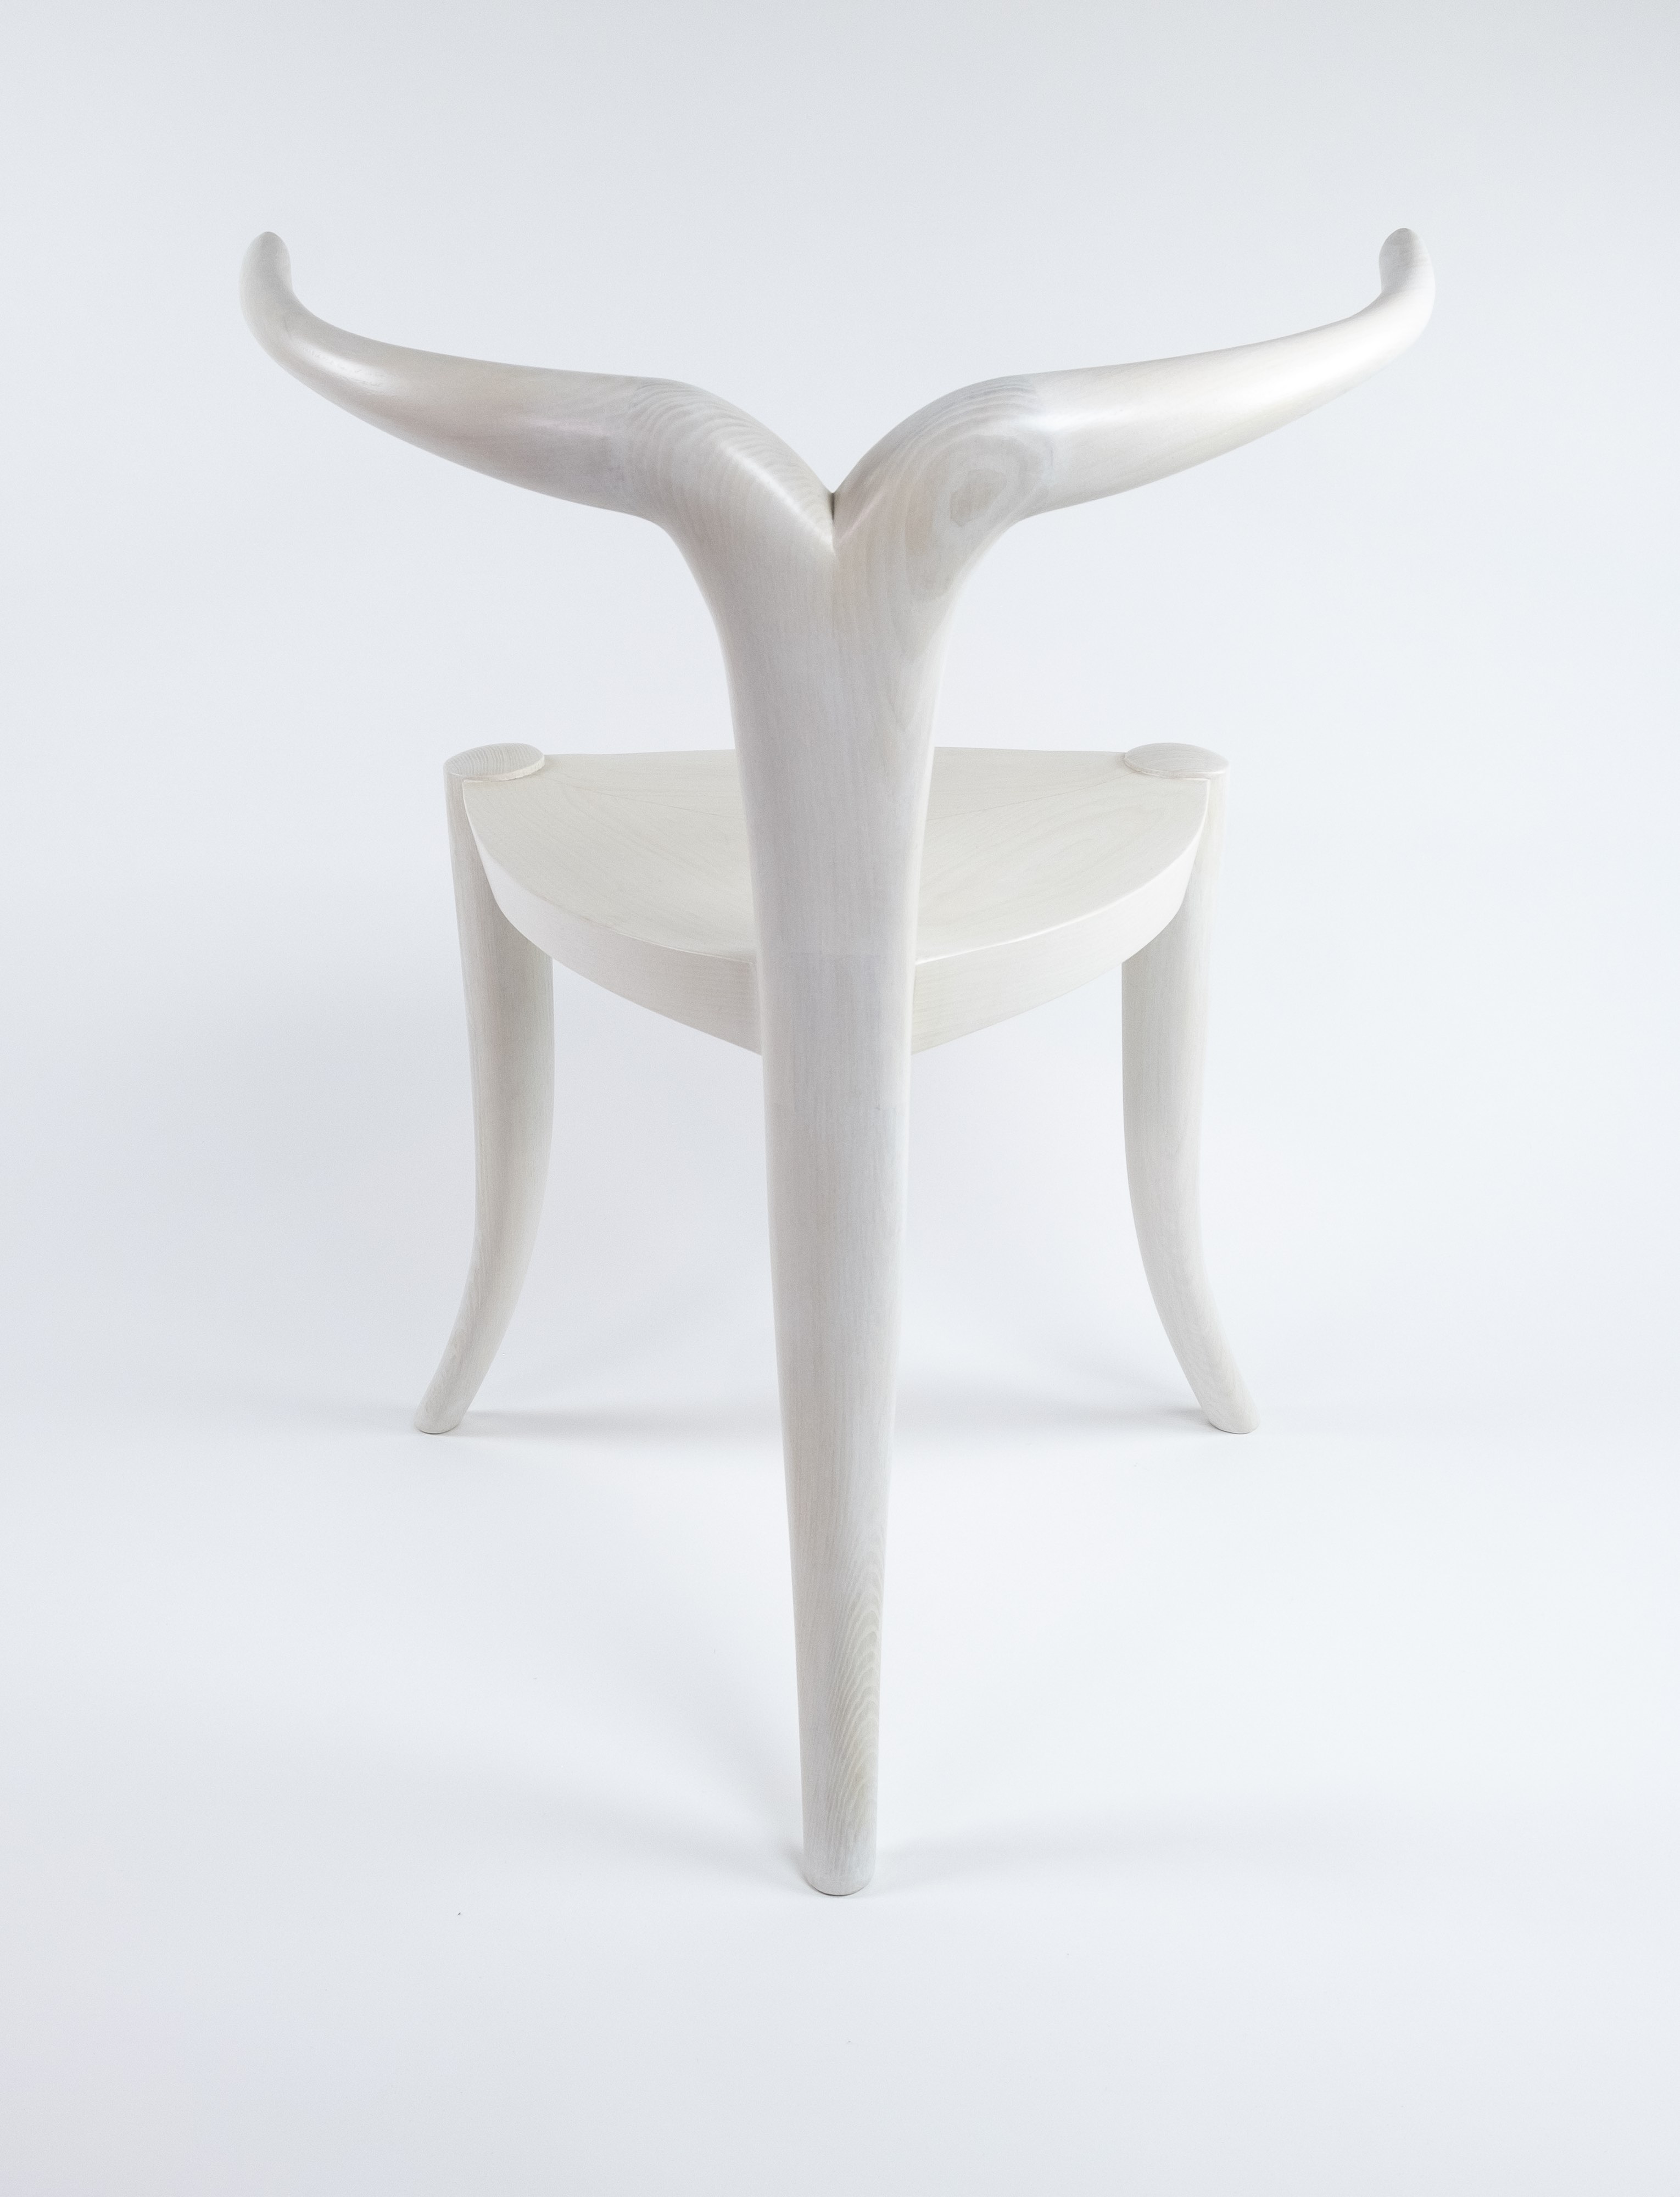 White chair with curved legs and back